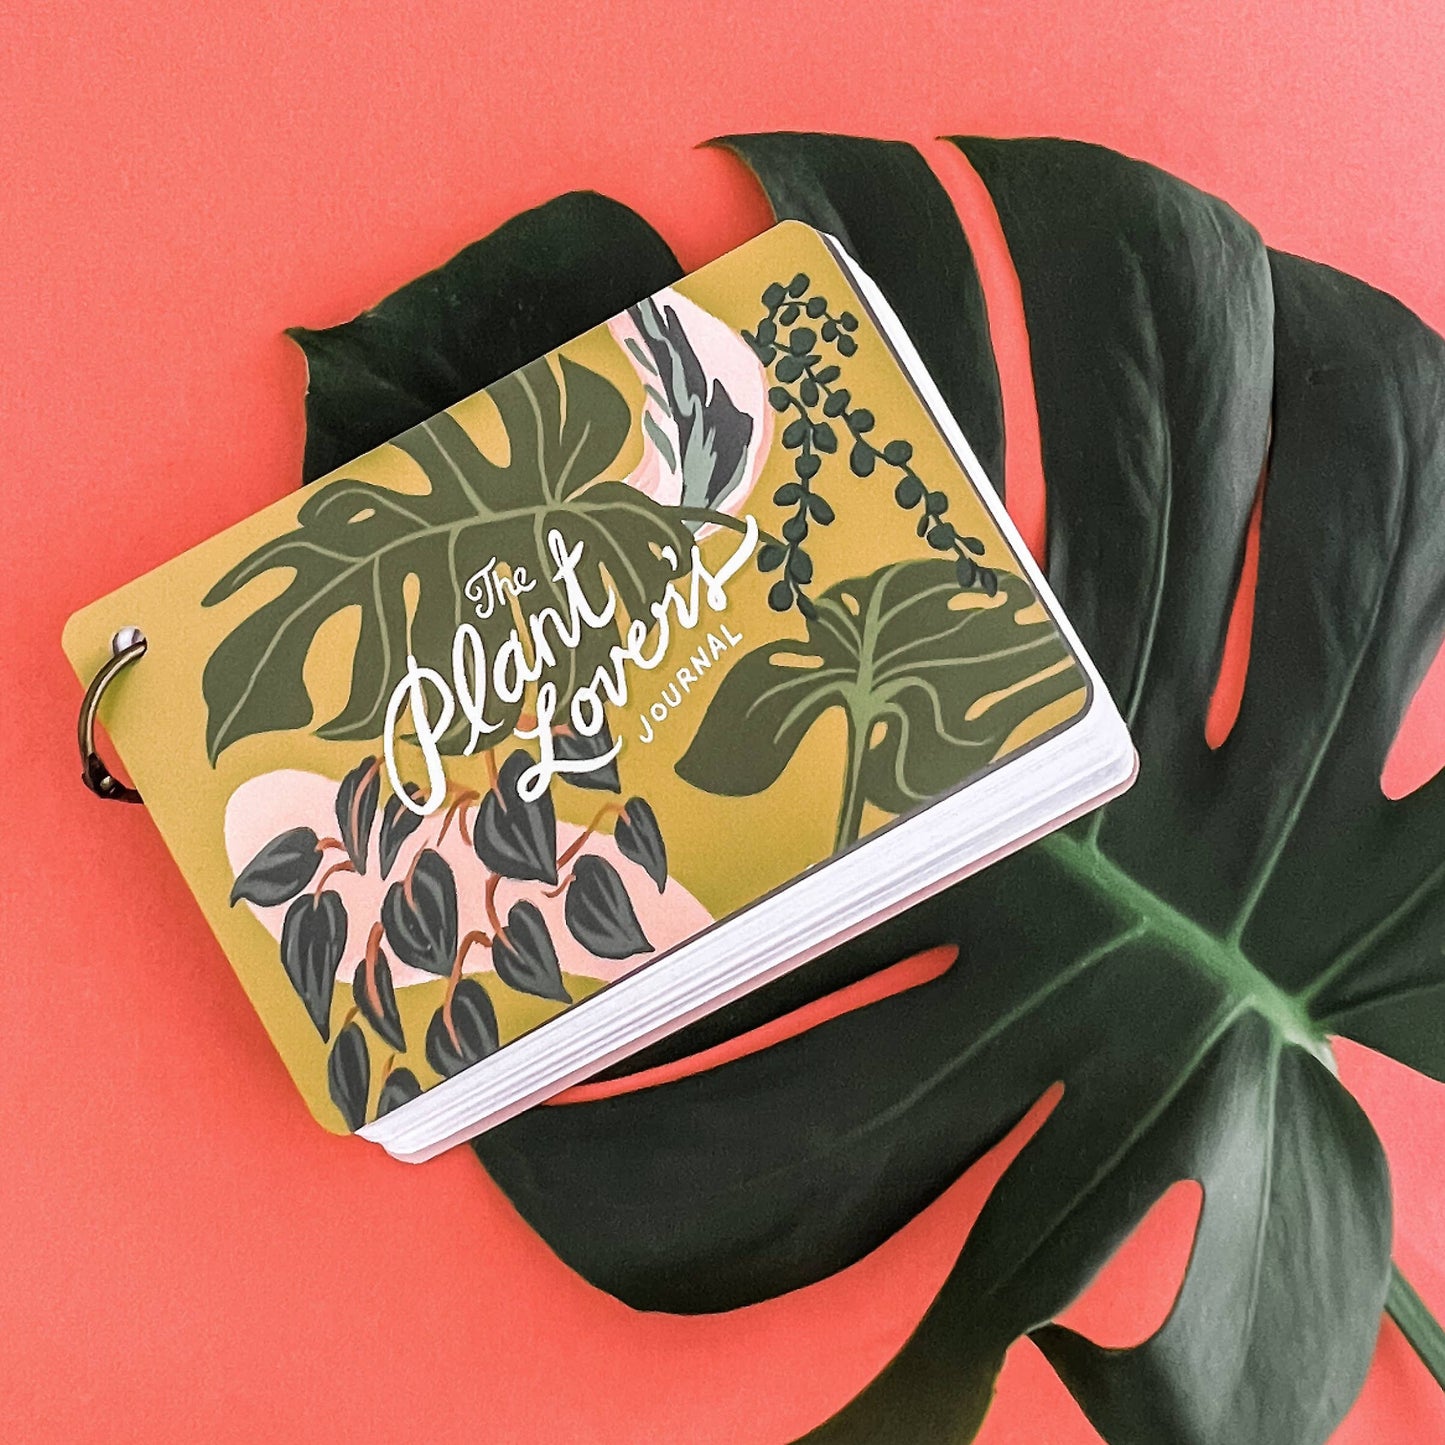 The Plant Lover's Journal